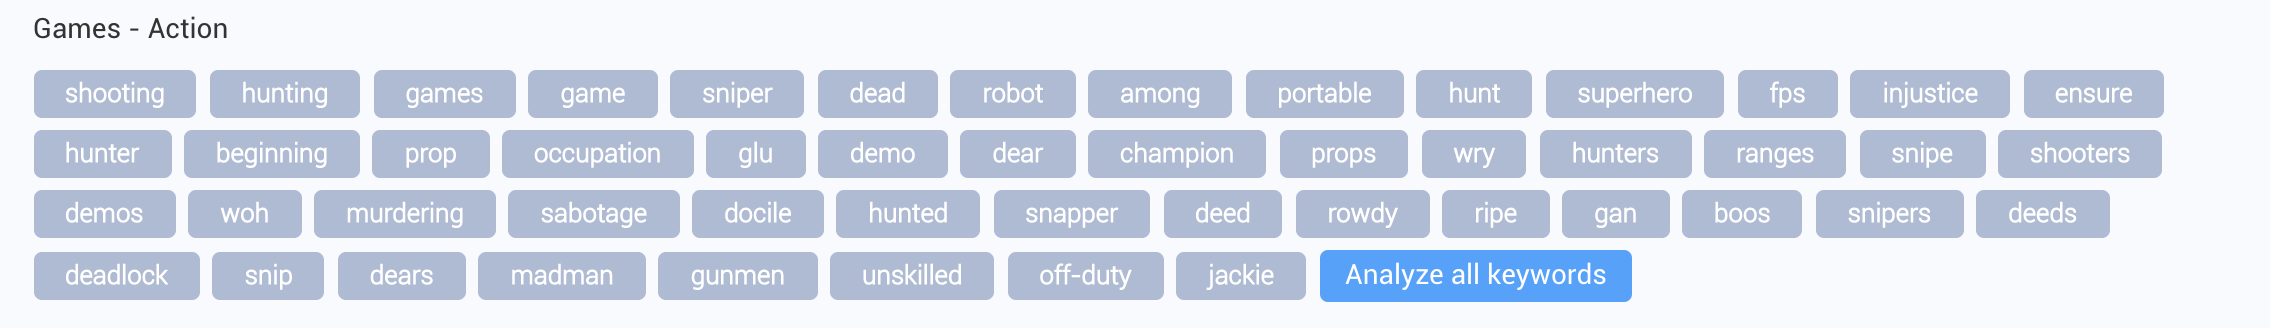 Top category keywords for the Games - Action category (Google Play US)